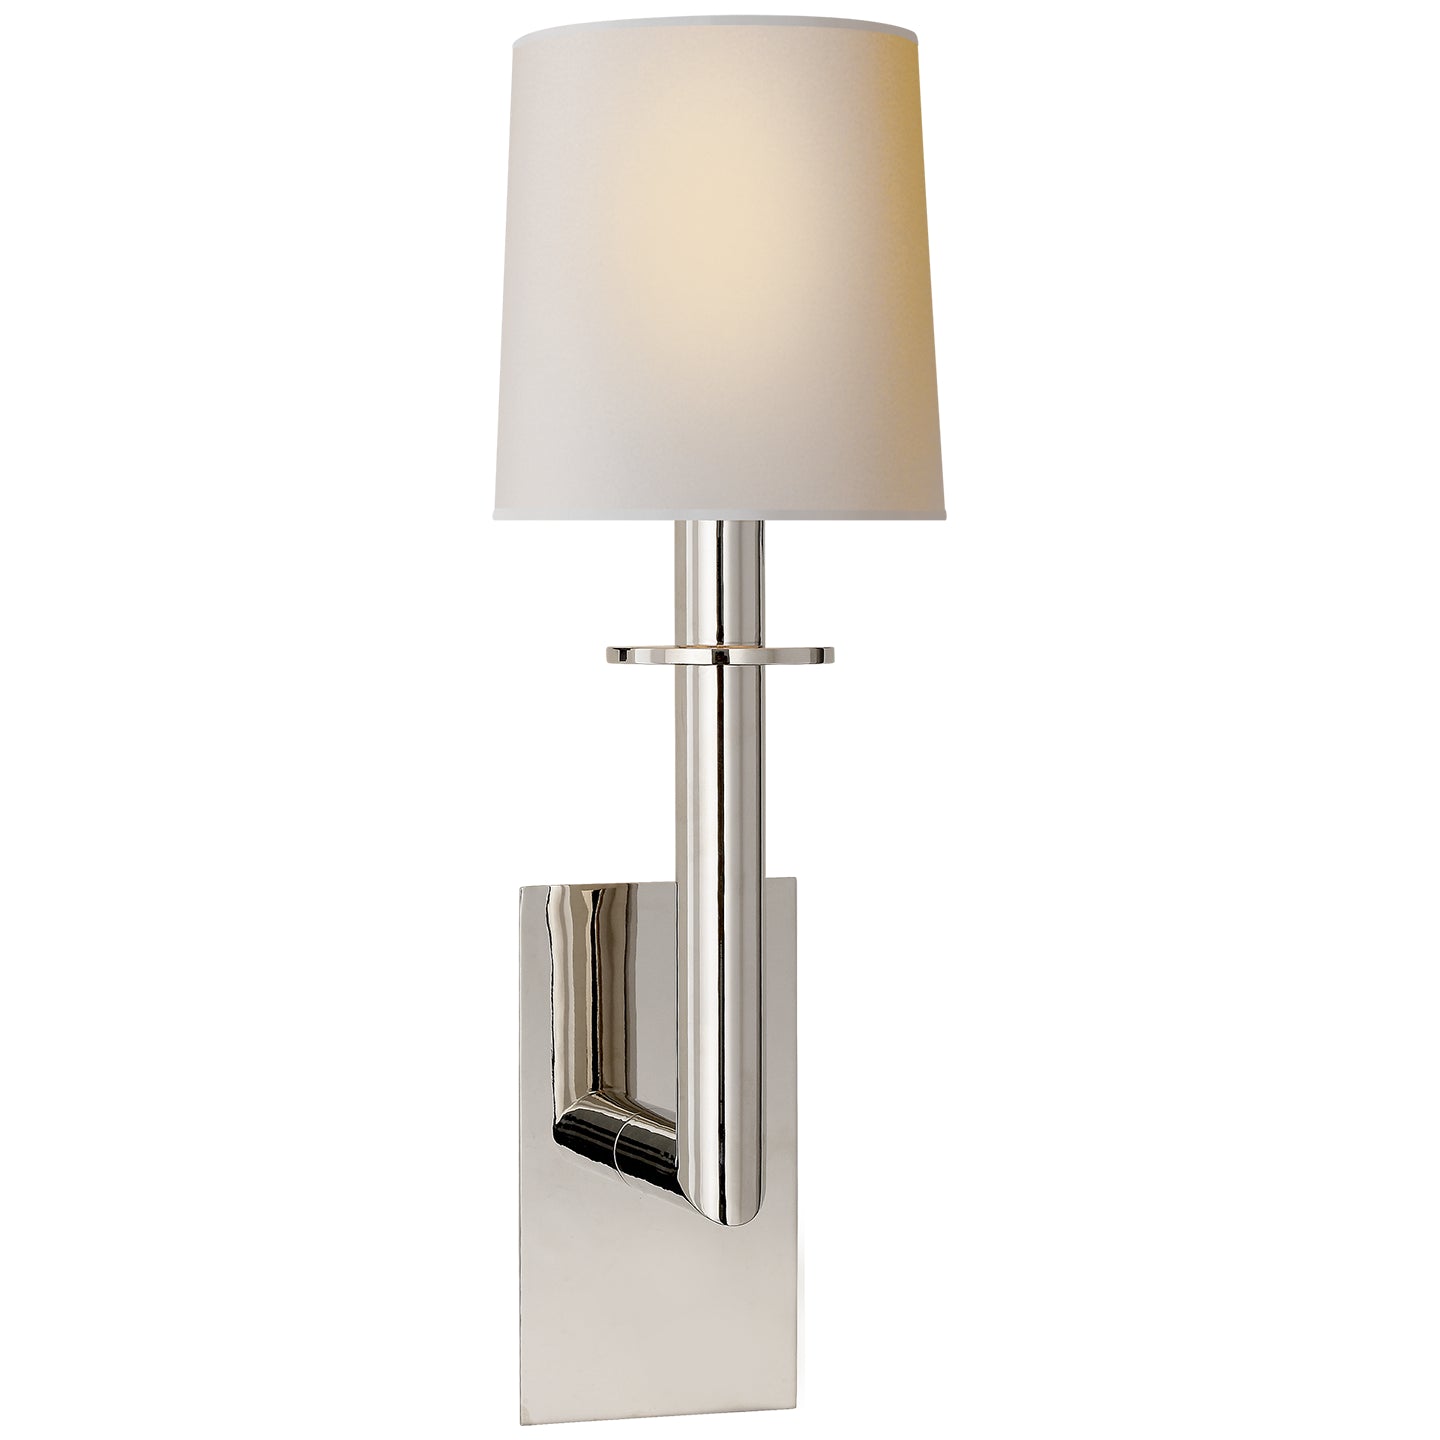 Load image into Gallery viewer, Visual Comfort Signature - SP 2017PN-NP - One Light Wall Sconce - Dalston - Polished Nickel
